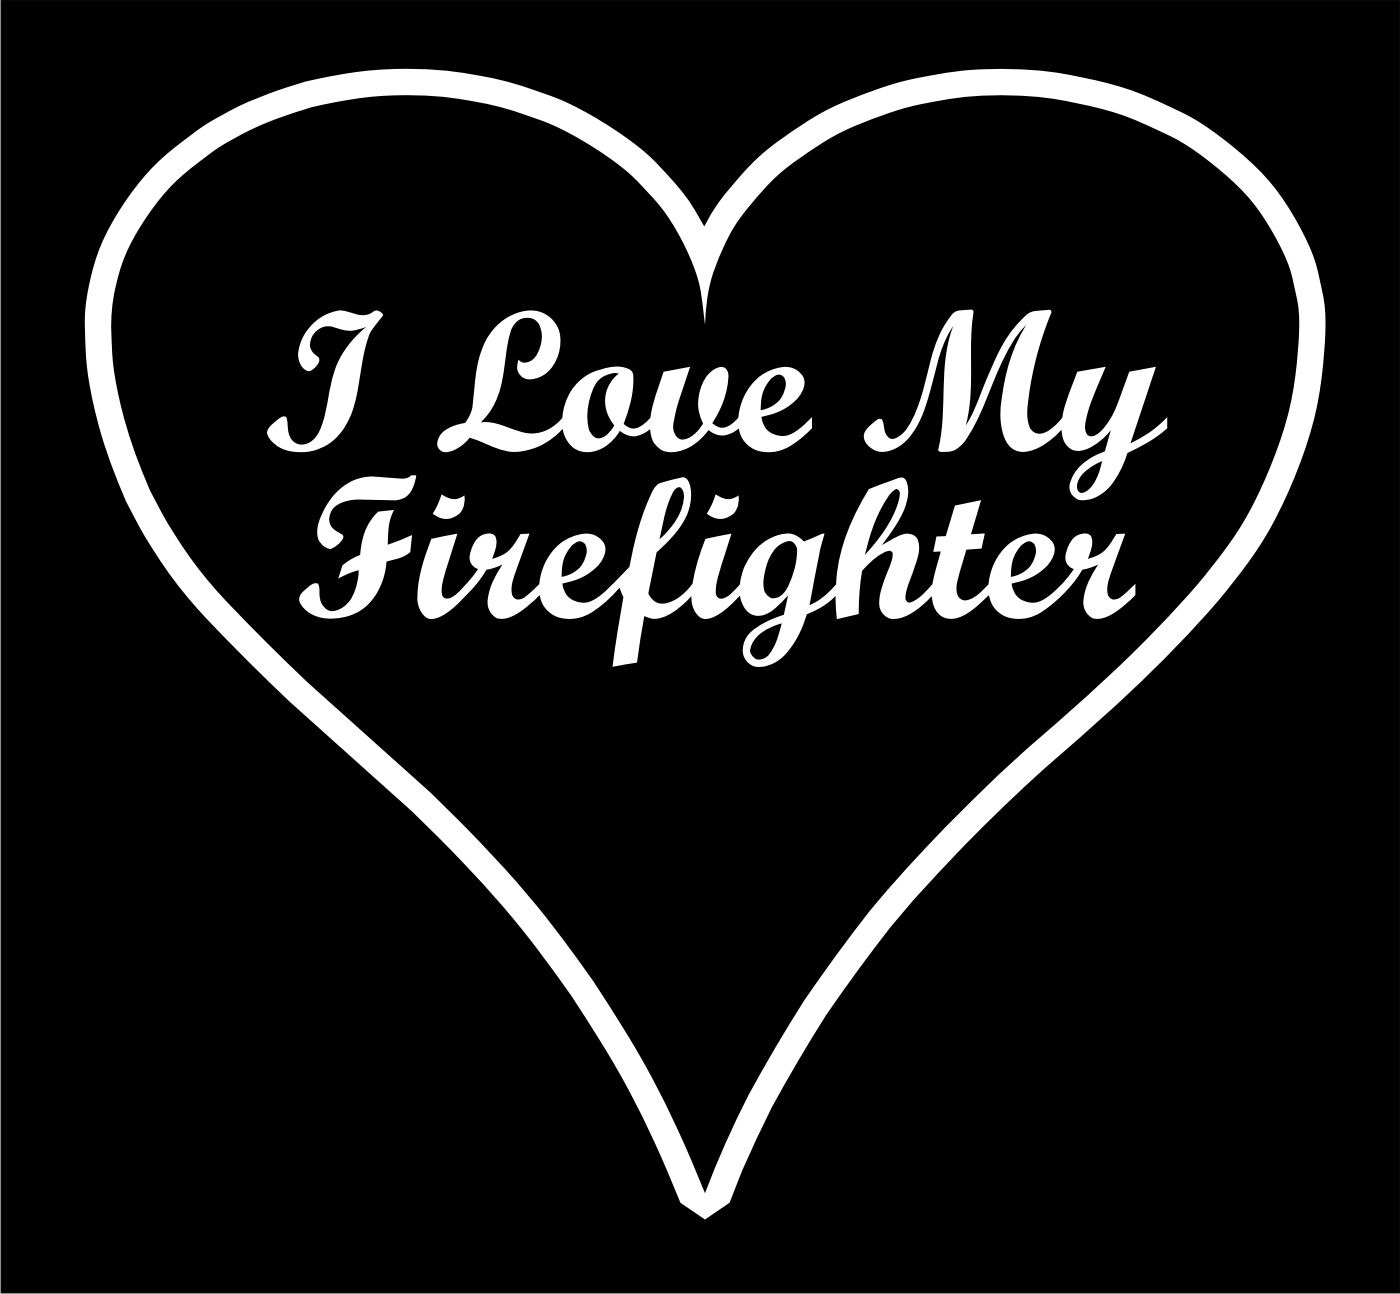 Firefighter Decal - I Love My Firefighter 6" Exterior window Decal in White - Powercall Sirens LLC